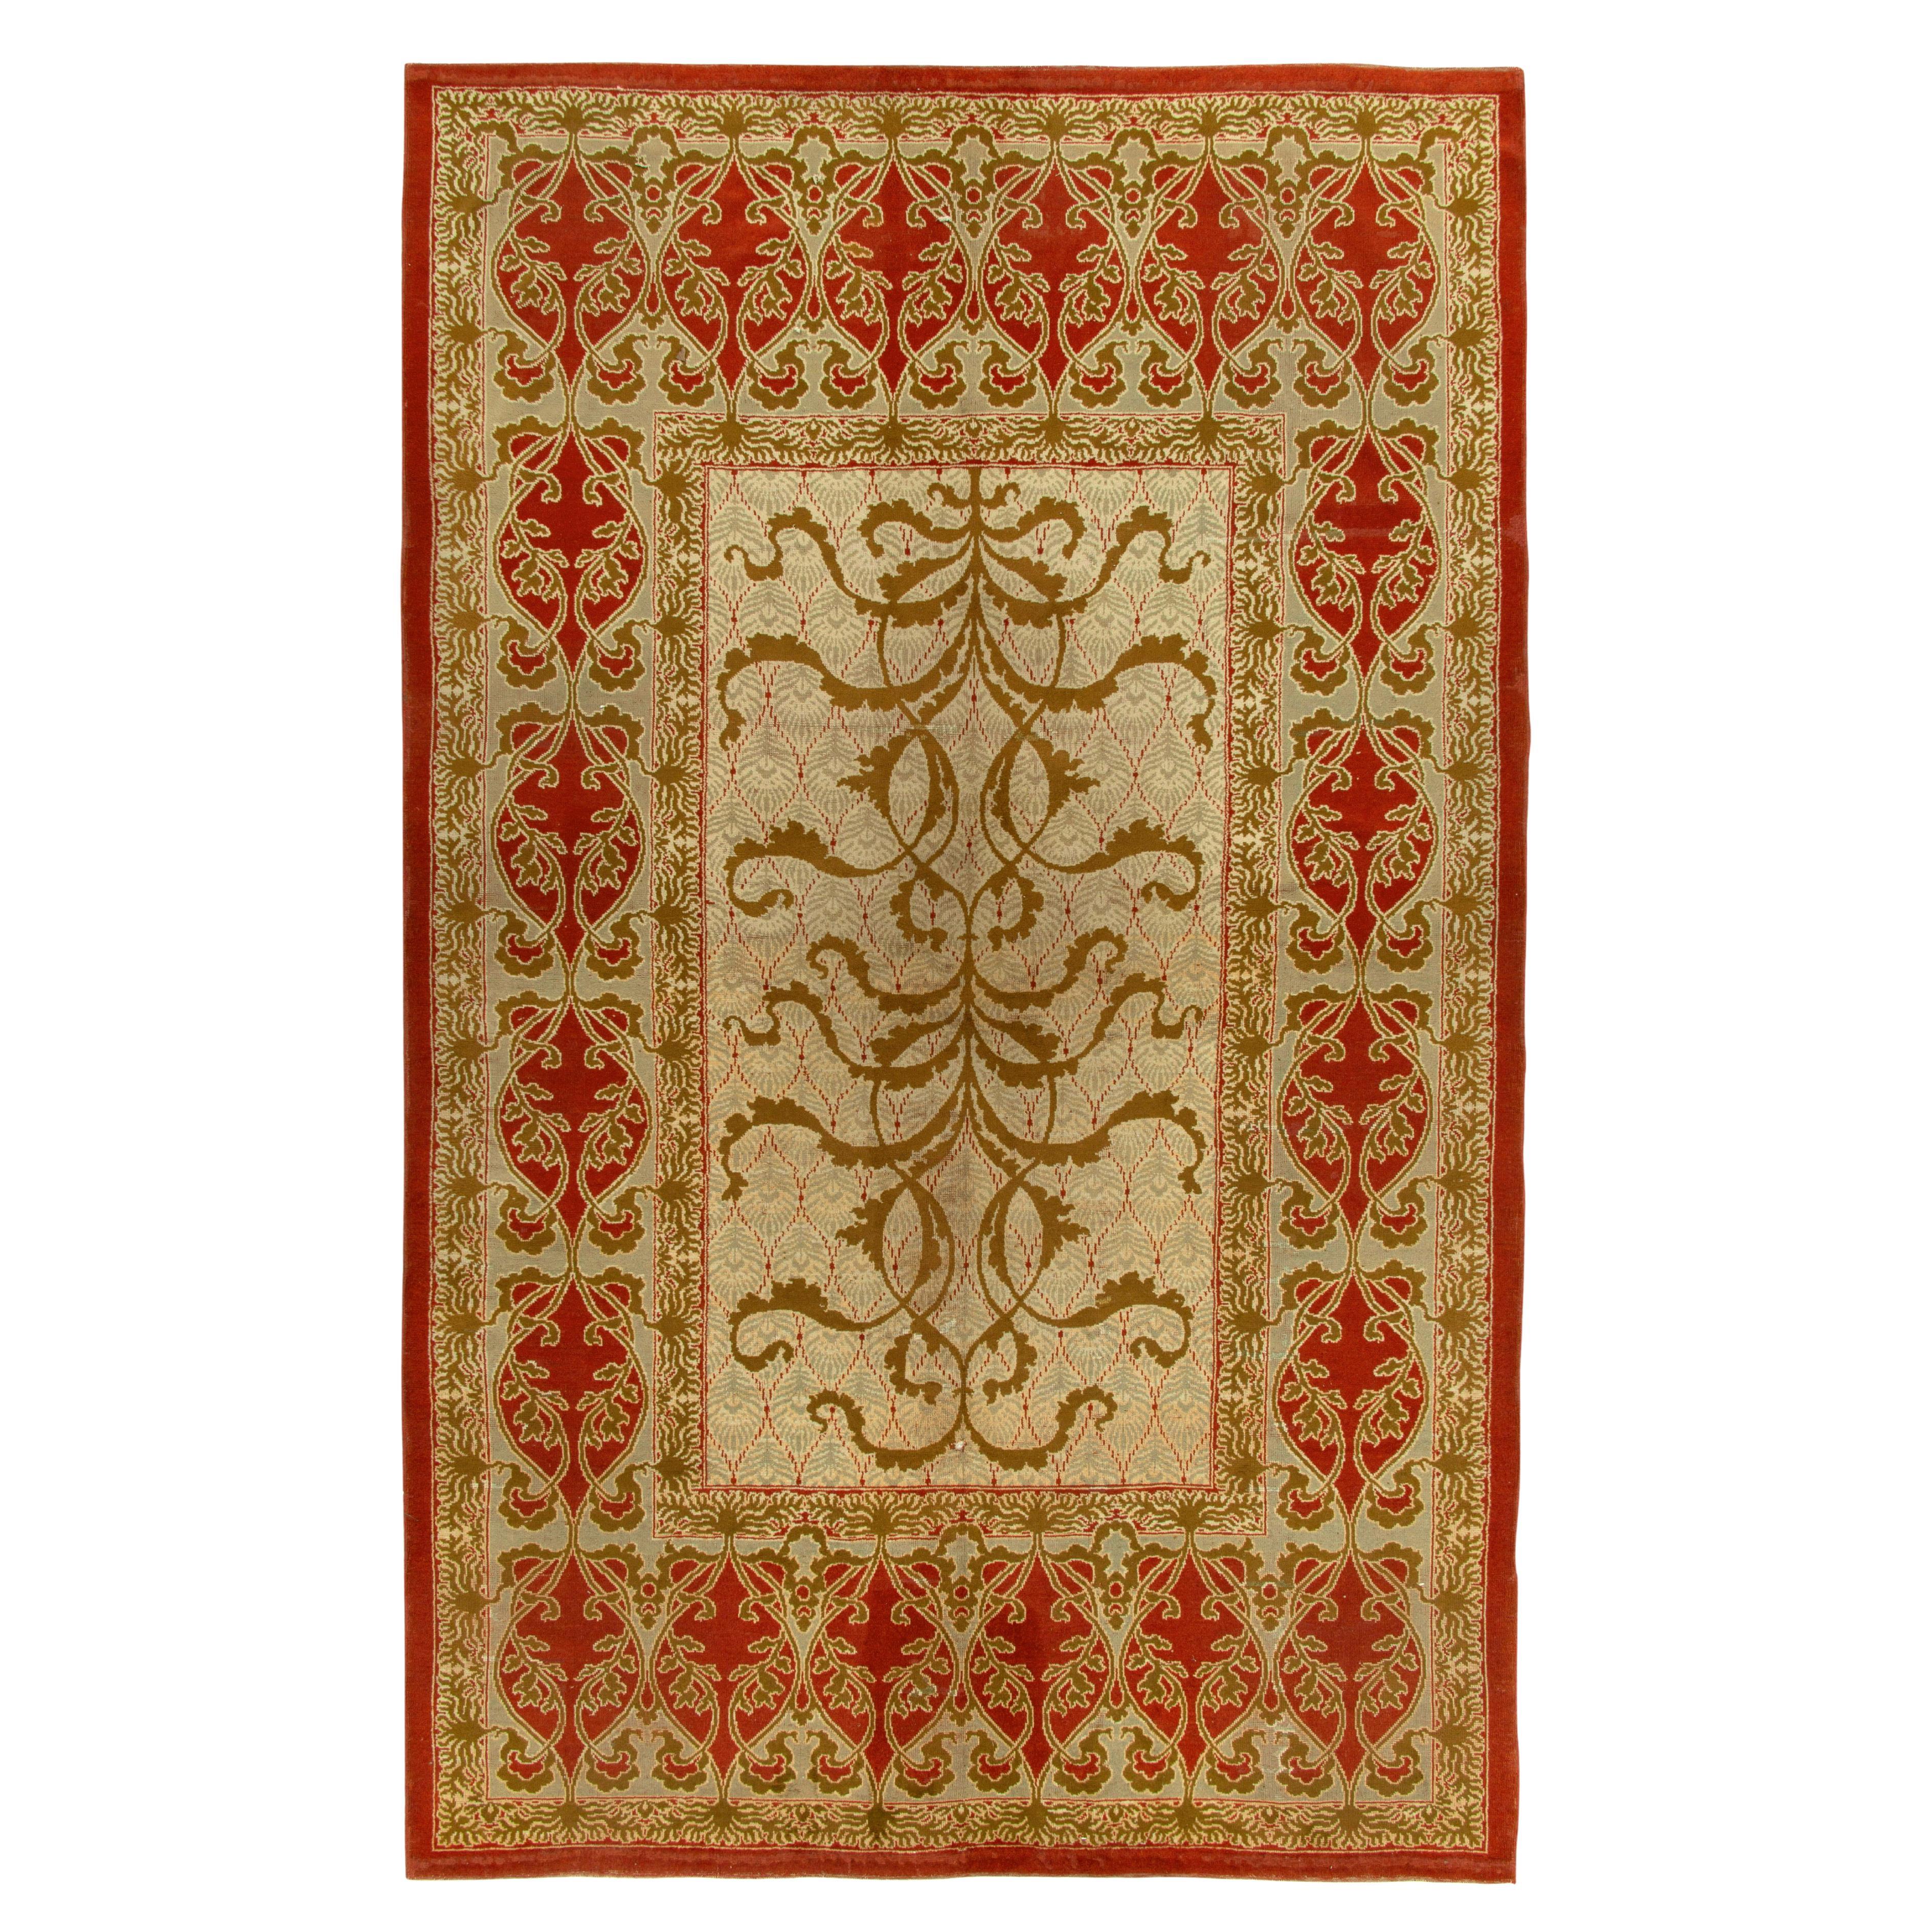 Antique Art Nouveau Rug in Red, Green, Brown Floral Pattern by Rug & Kilim For Sale